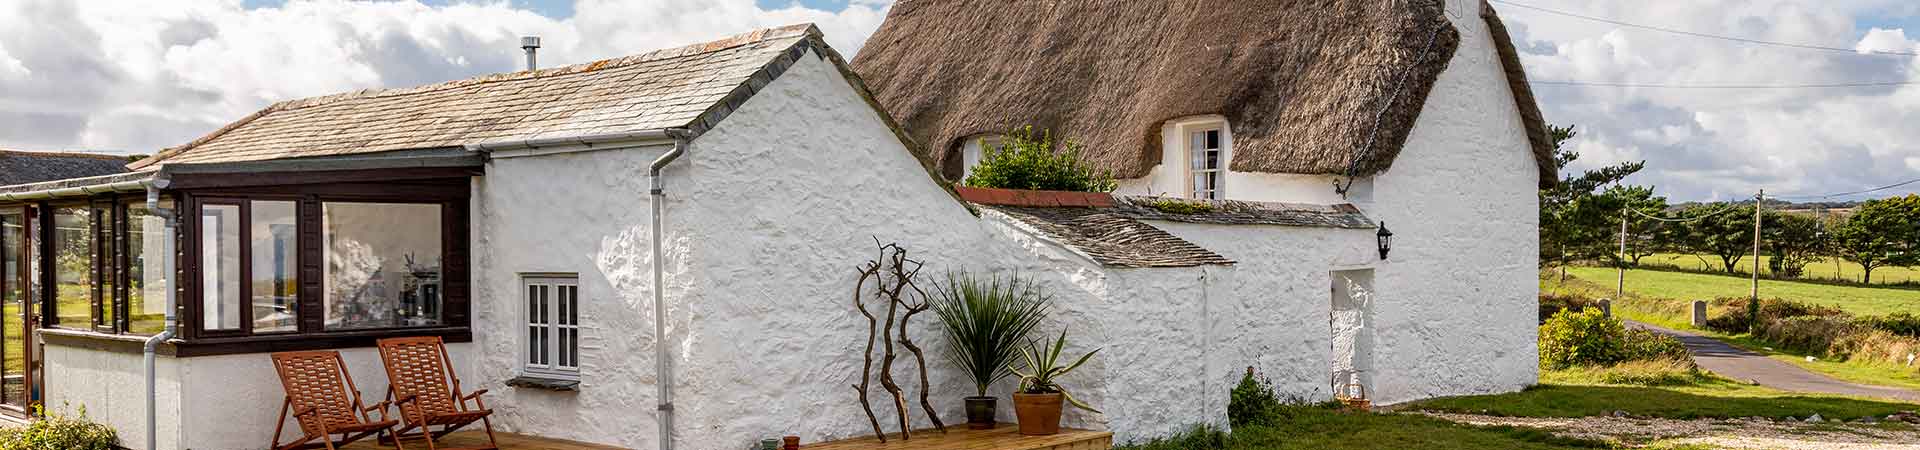 Thatched holiday cottages in South West Cornwall